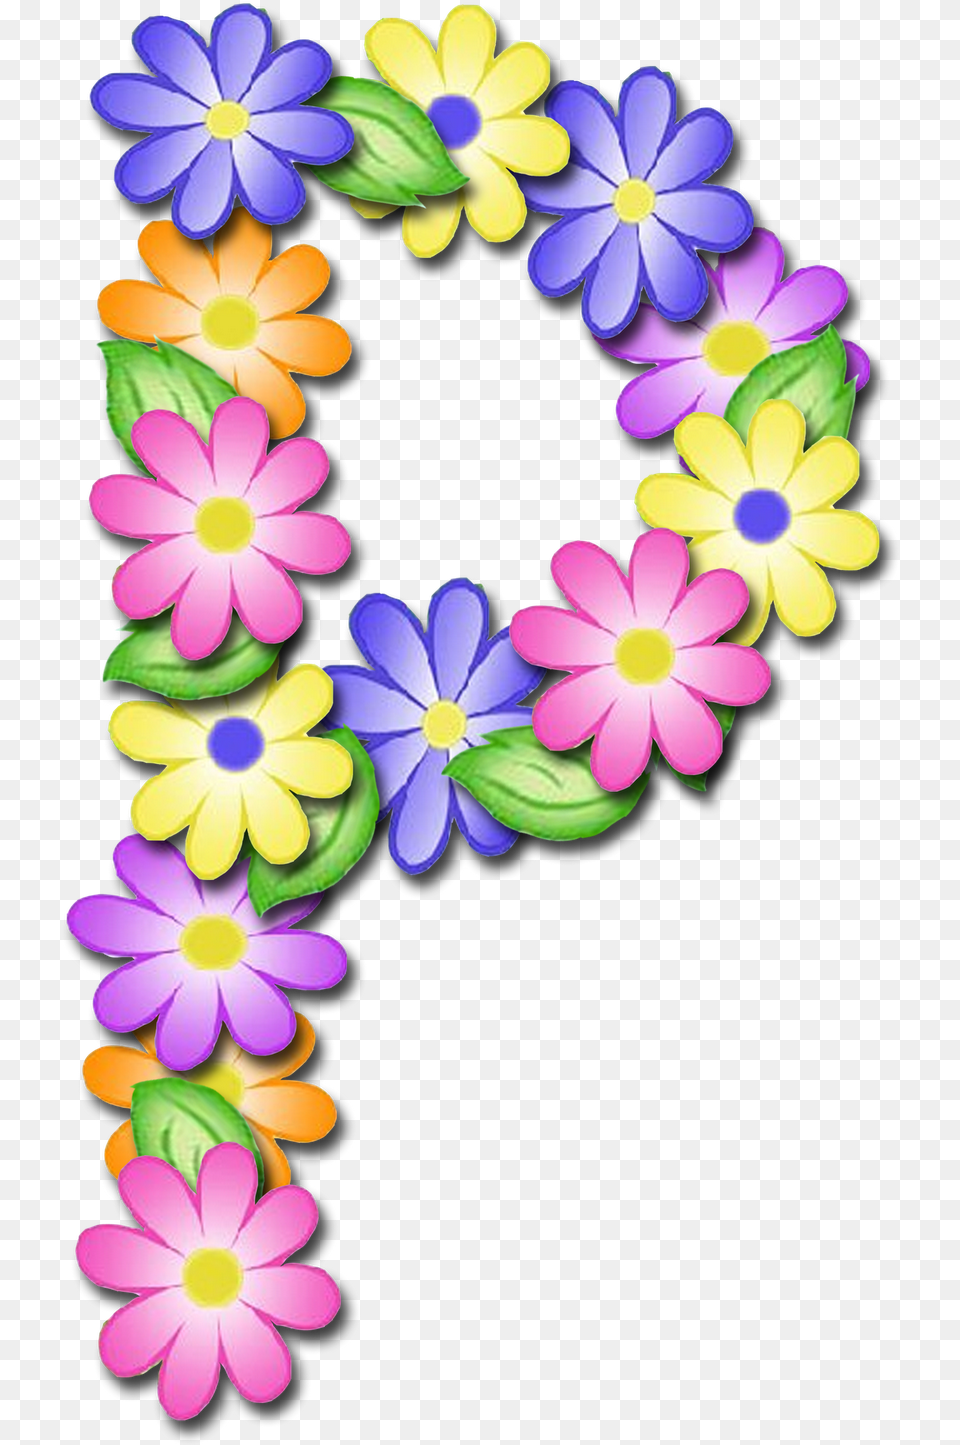 Index Of Atvinfo2017ebm Leoberto Leal2 Anolportugues Background Yellow And Blue Flowers, Accessories, Daisy, Flower, Flower Arrangement Free Transparent Png